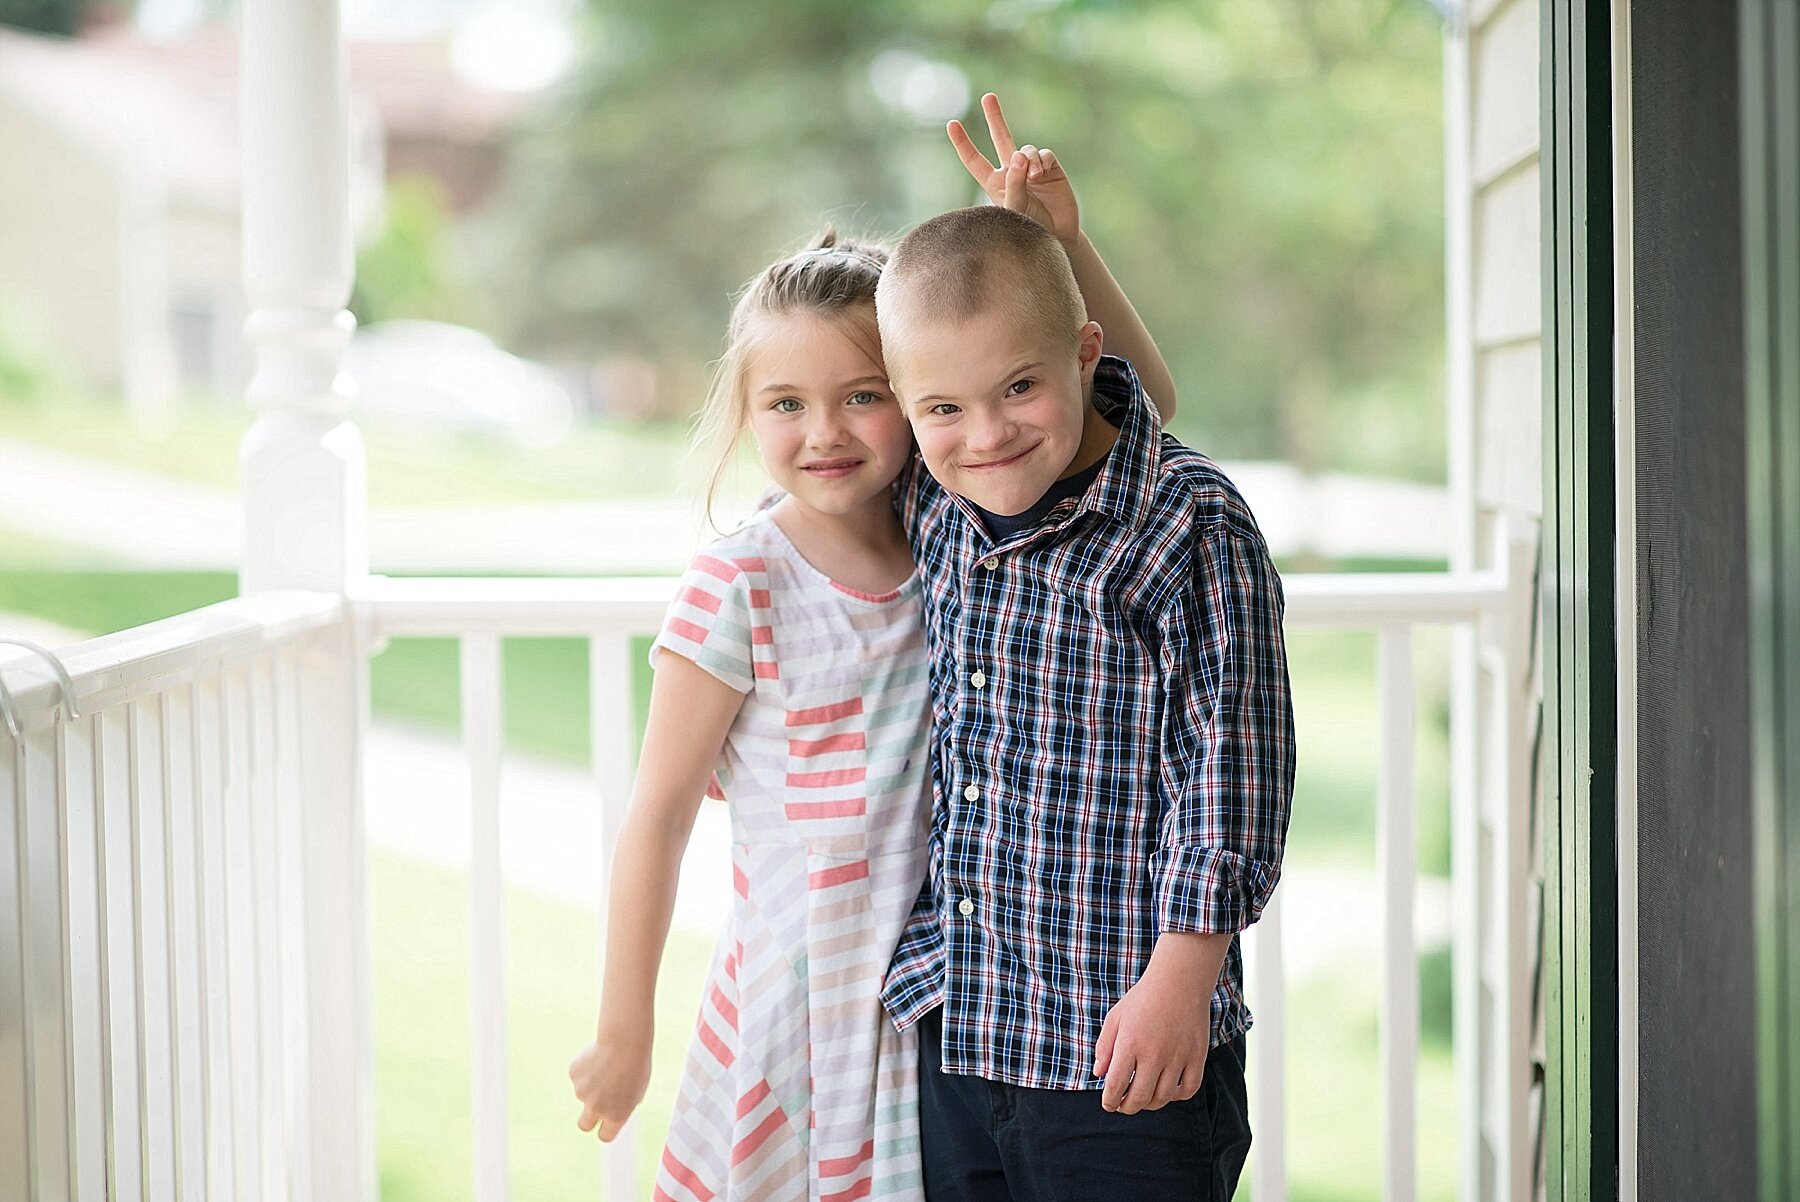 Wendy Zook Photography | Down Syndrome Awareness, Down Syndrome family, sibling with Down Syndrome, siblings, brother and sister, parent of child with Down Syndrome, DS awareness